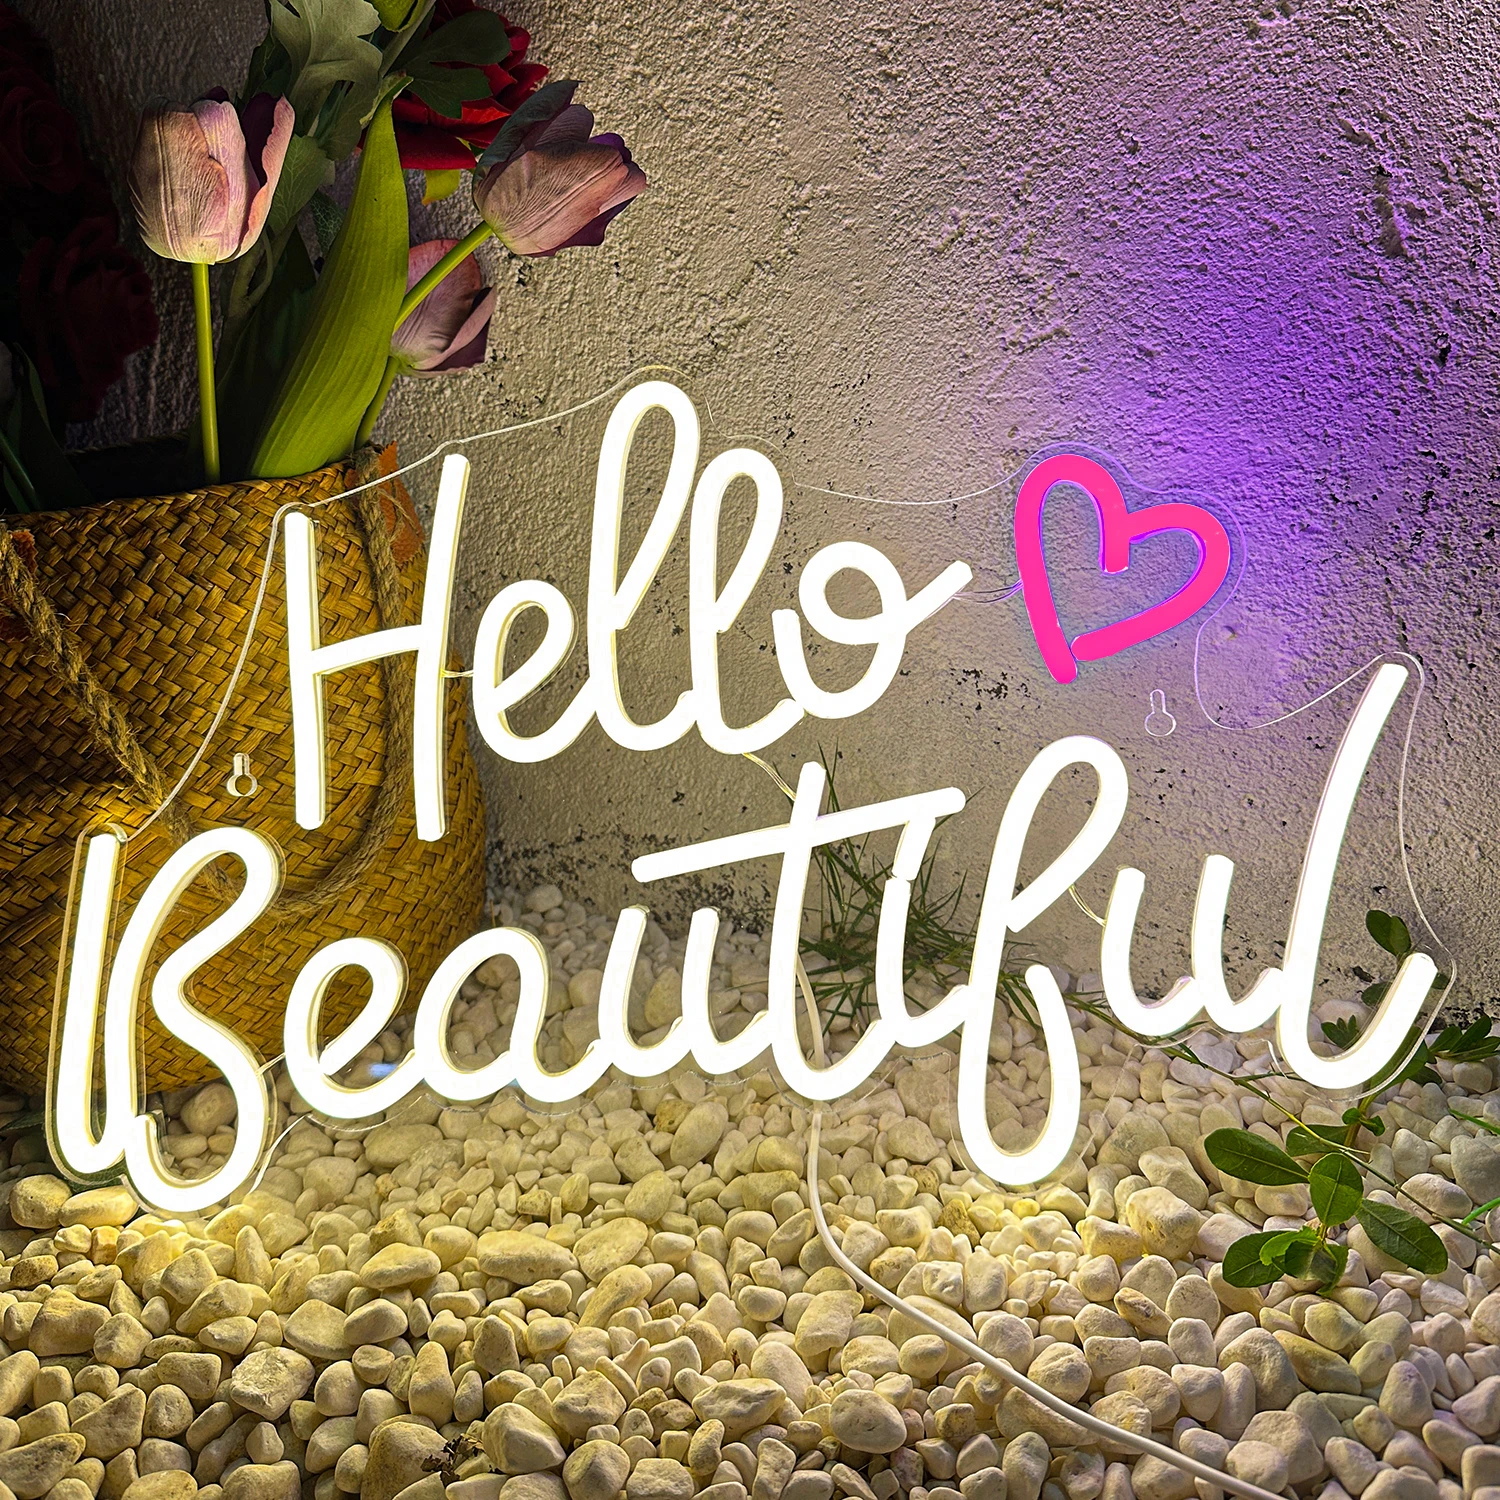 Hello Beautiful Neon Sign Studio Wedding Party LED Light Aesthetic Bedroom Home Game Room Art Personality Wall Decor Lamp Gift